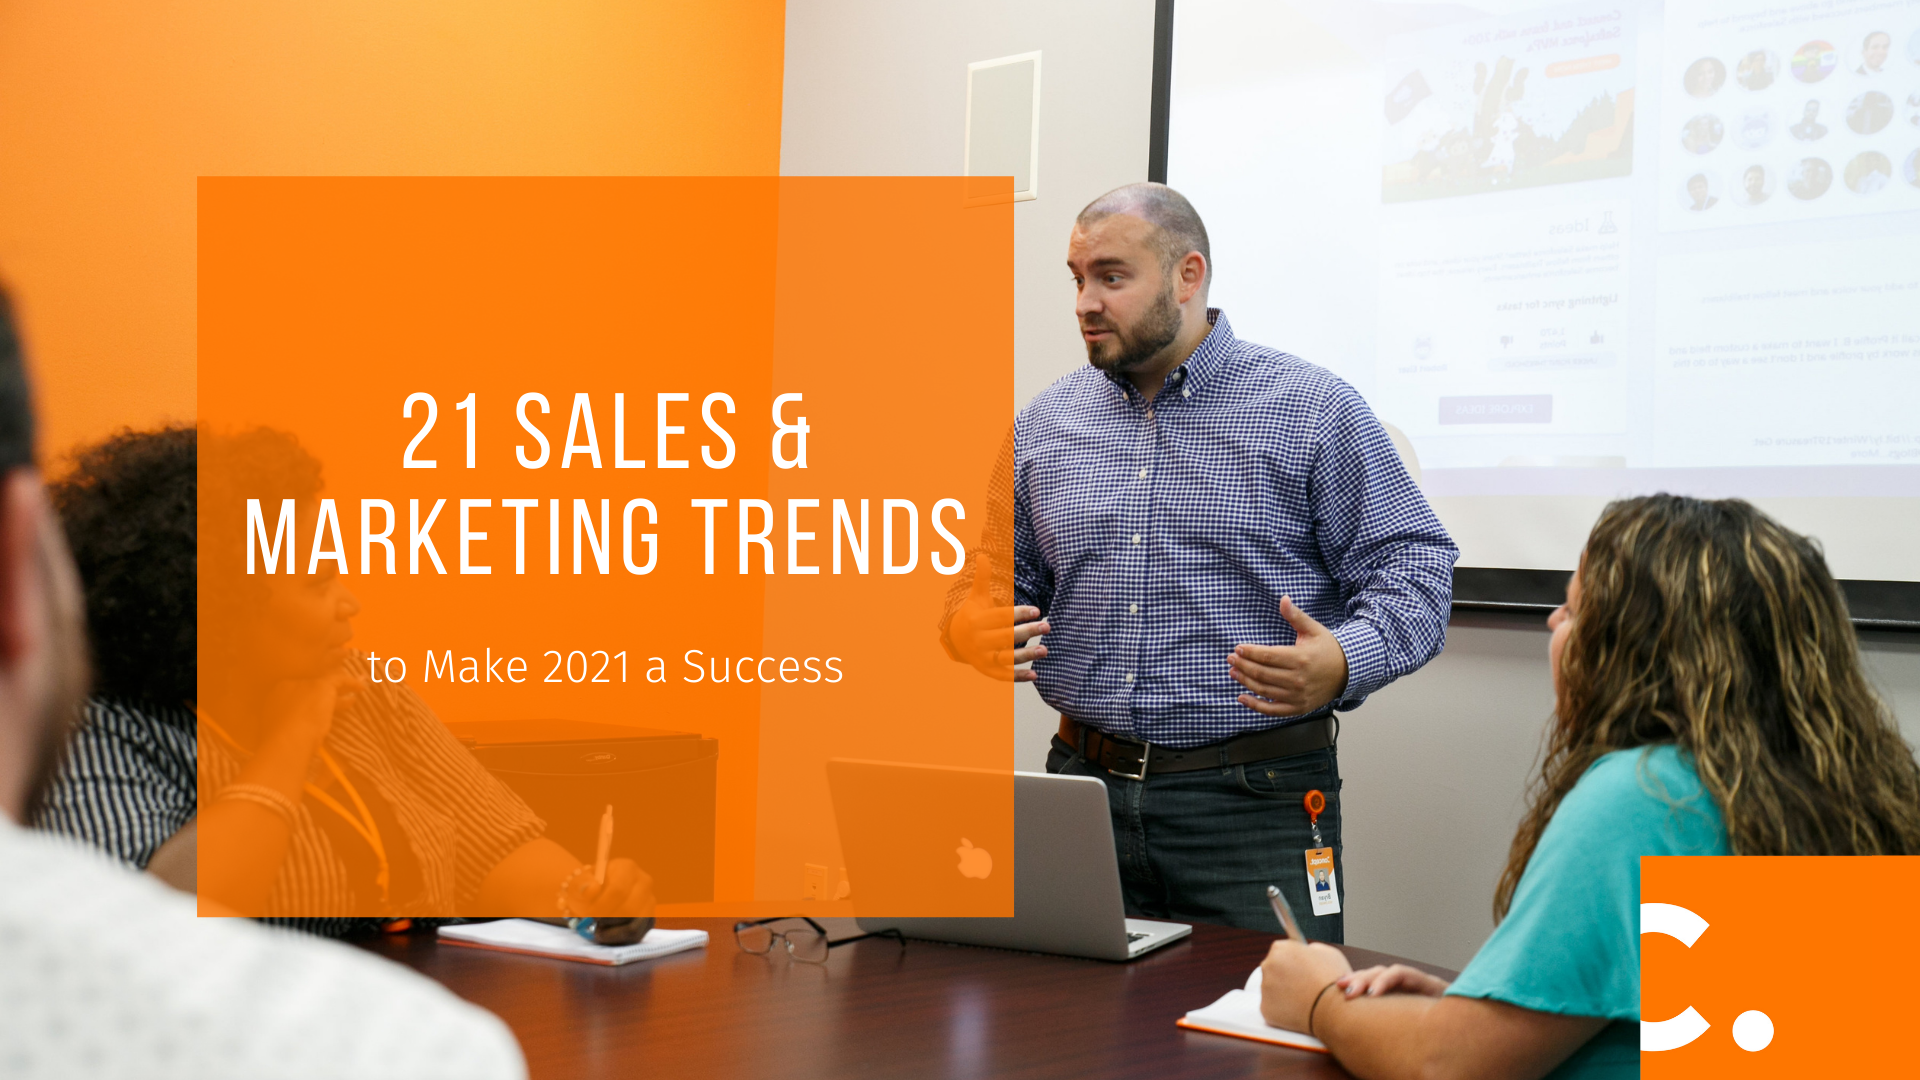 Read our 21 Sales and Marketing Trends in 2021.